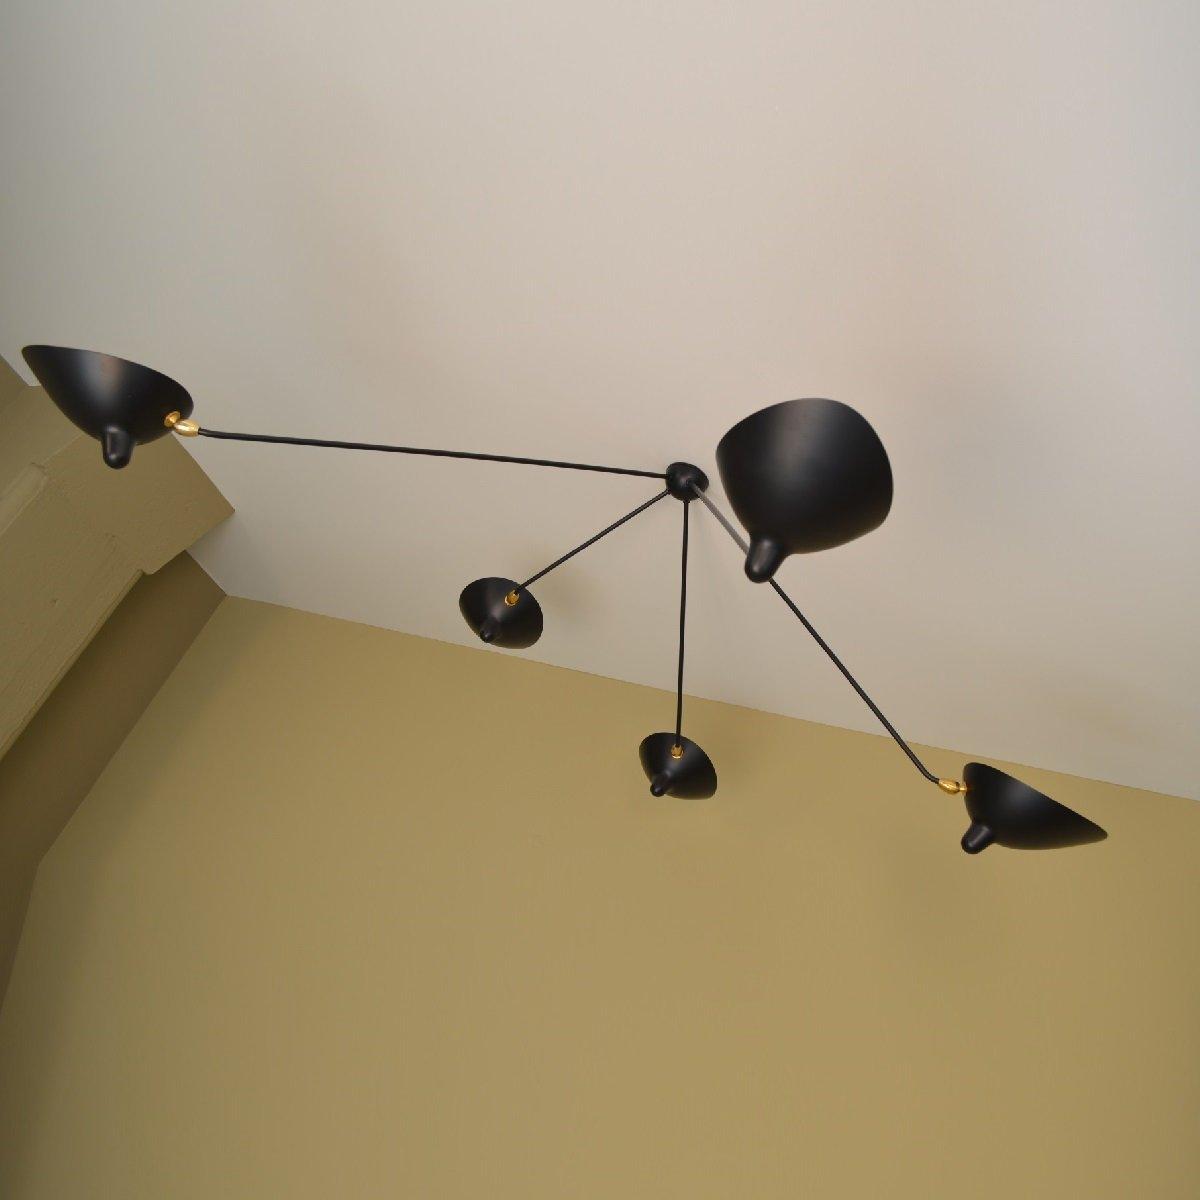 Leaning Serge Mouille Ceiling Lamp B